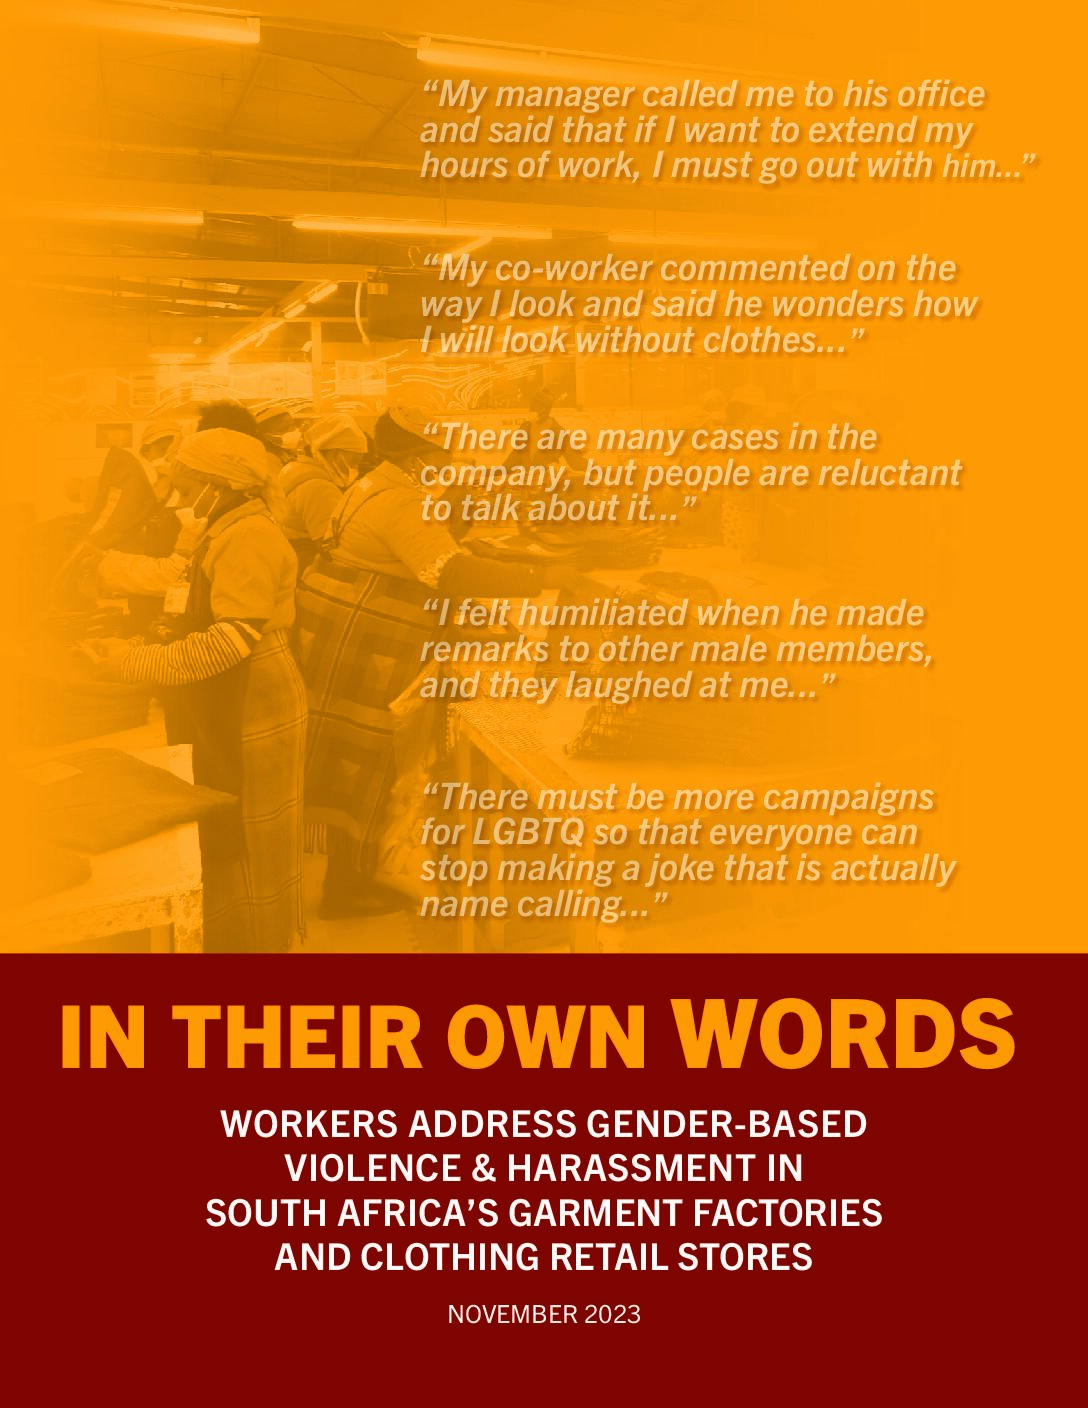 Cover of In Their Own Words: Workers Address Gender-Based Violence & Harassment in South Africa's Garment Factories and Clothing Retail Stores, a report by Solidarity Center